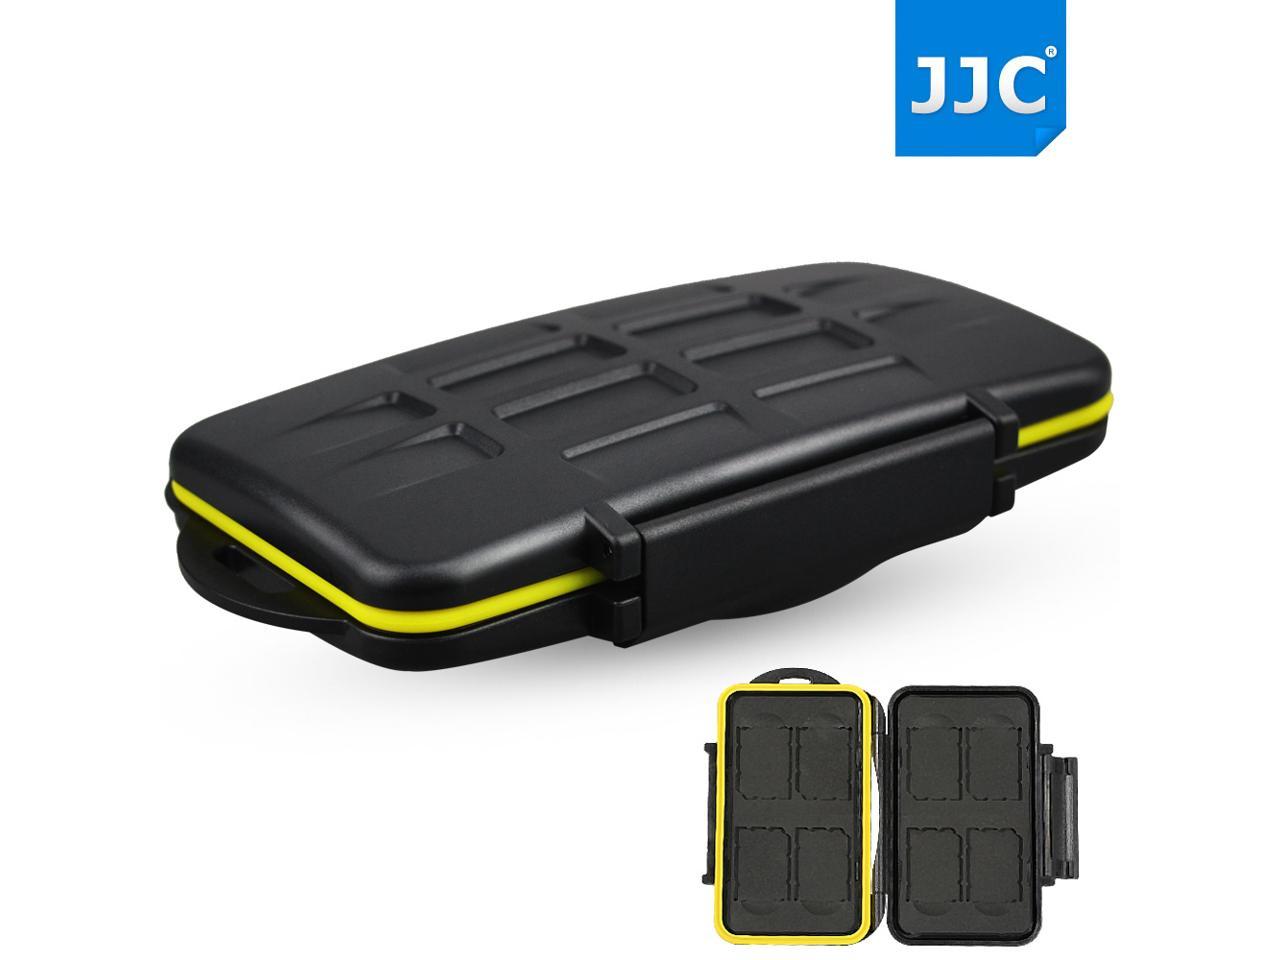 JJC Anti-shock Water-resistant SD Card Holder Camera Memory Card Case Storage Cover Protector For 8 PCS SecureDigital(SD)